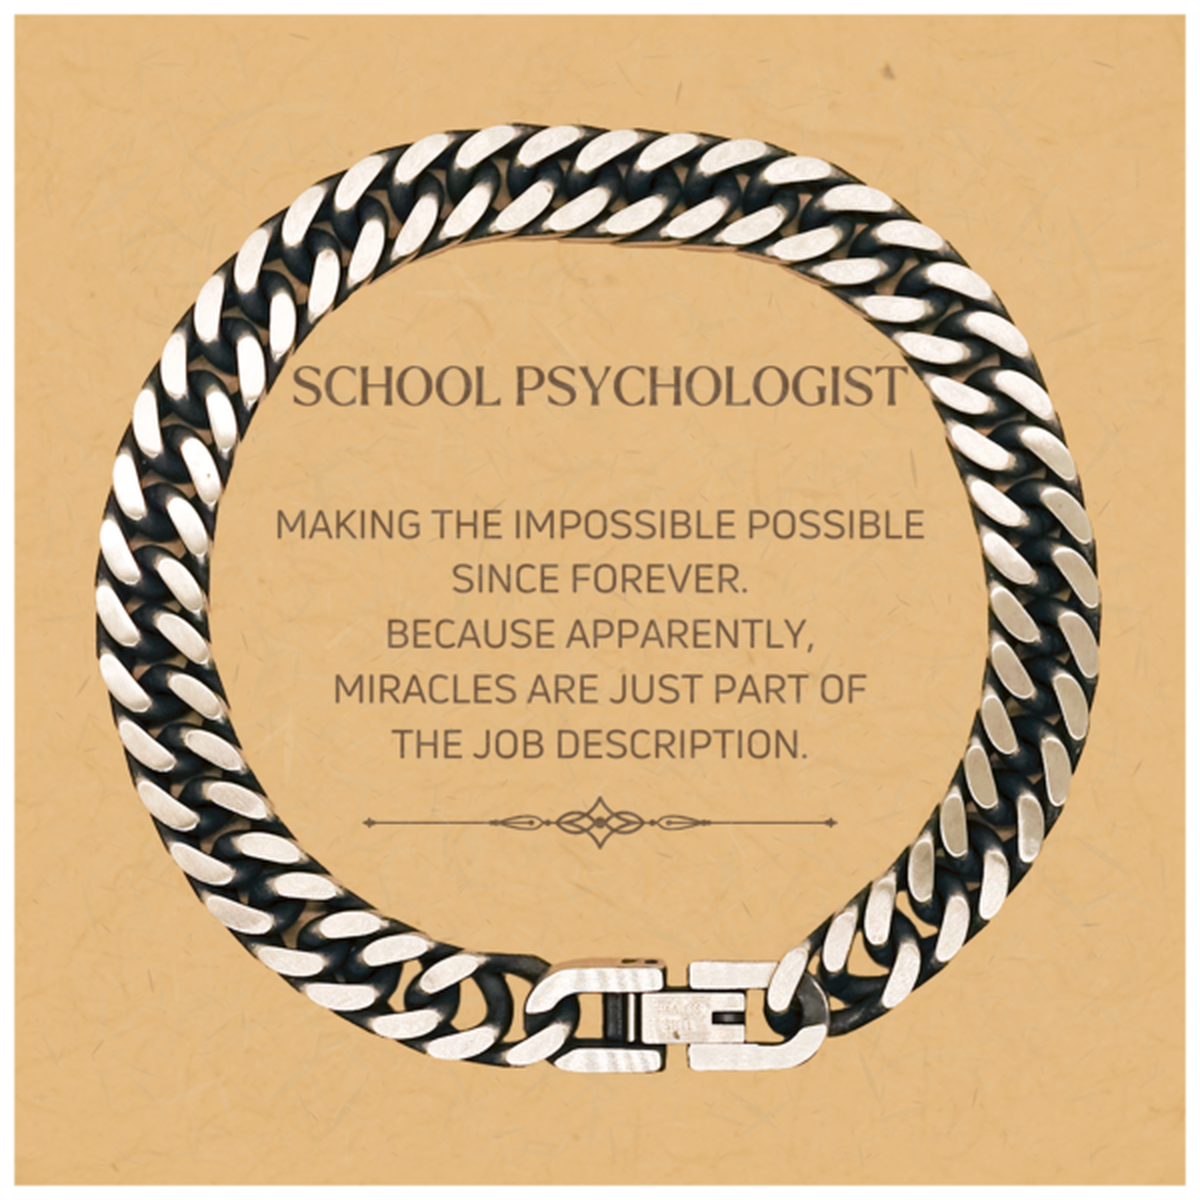 Funny School Psychologist Gifts, Miracles are just part of the job description, Inspirational Birthday Christmas Cuban Link Chain Bracelet For School Psychologist, Men, Women, Coworkers, Friends, Boss